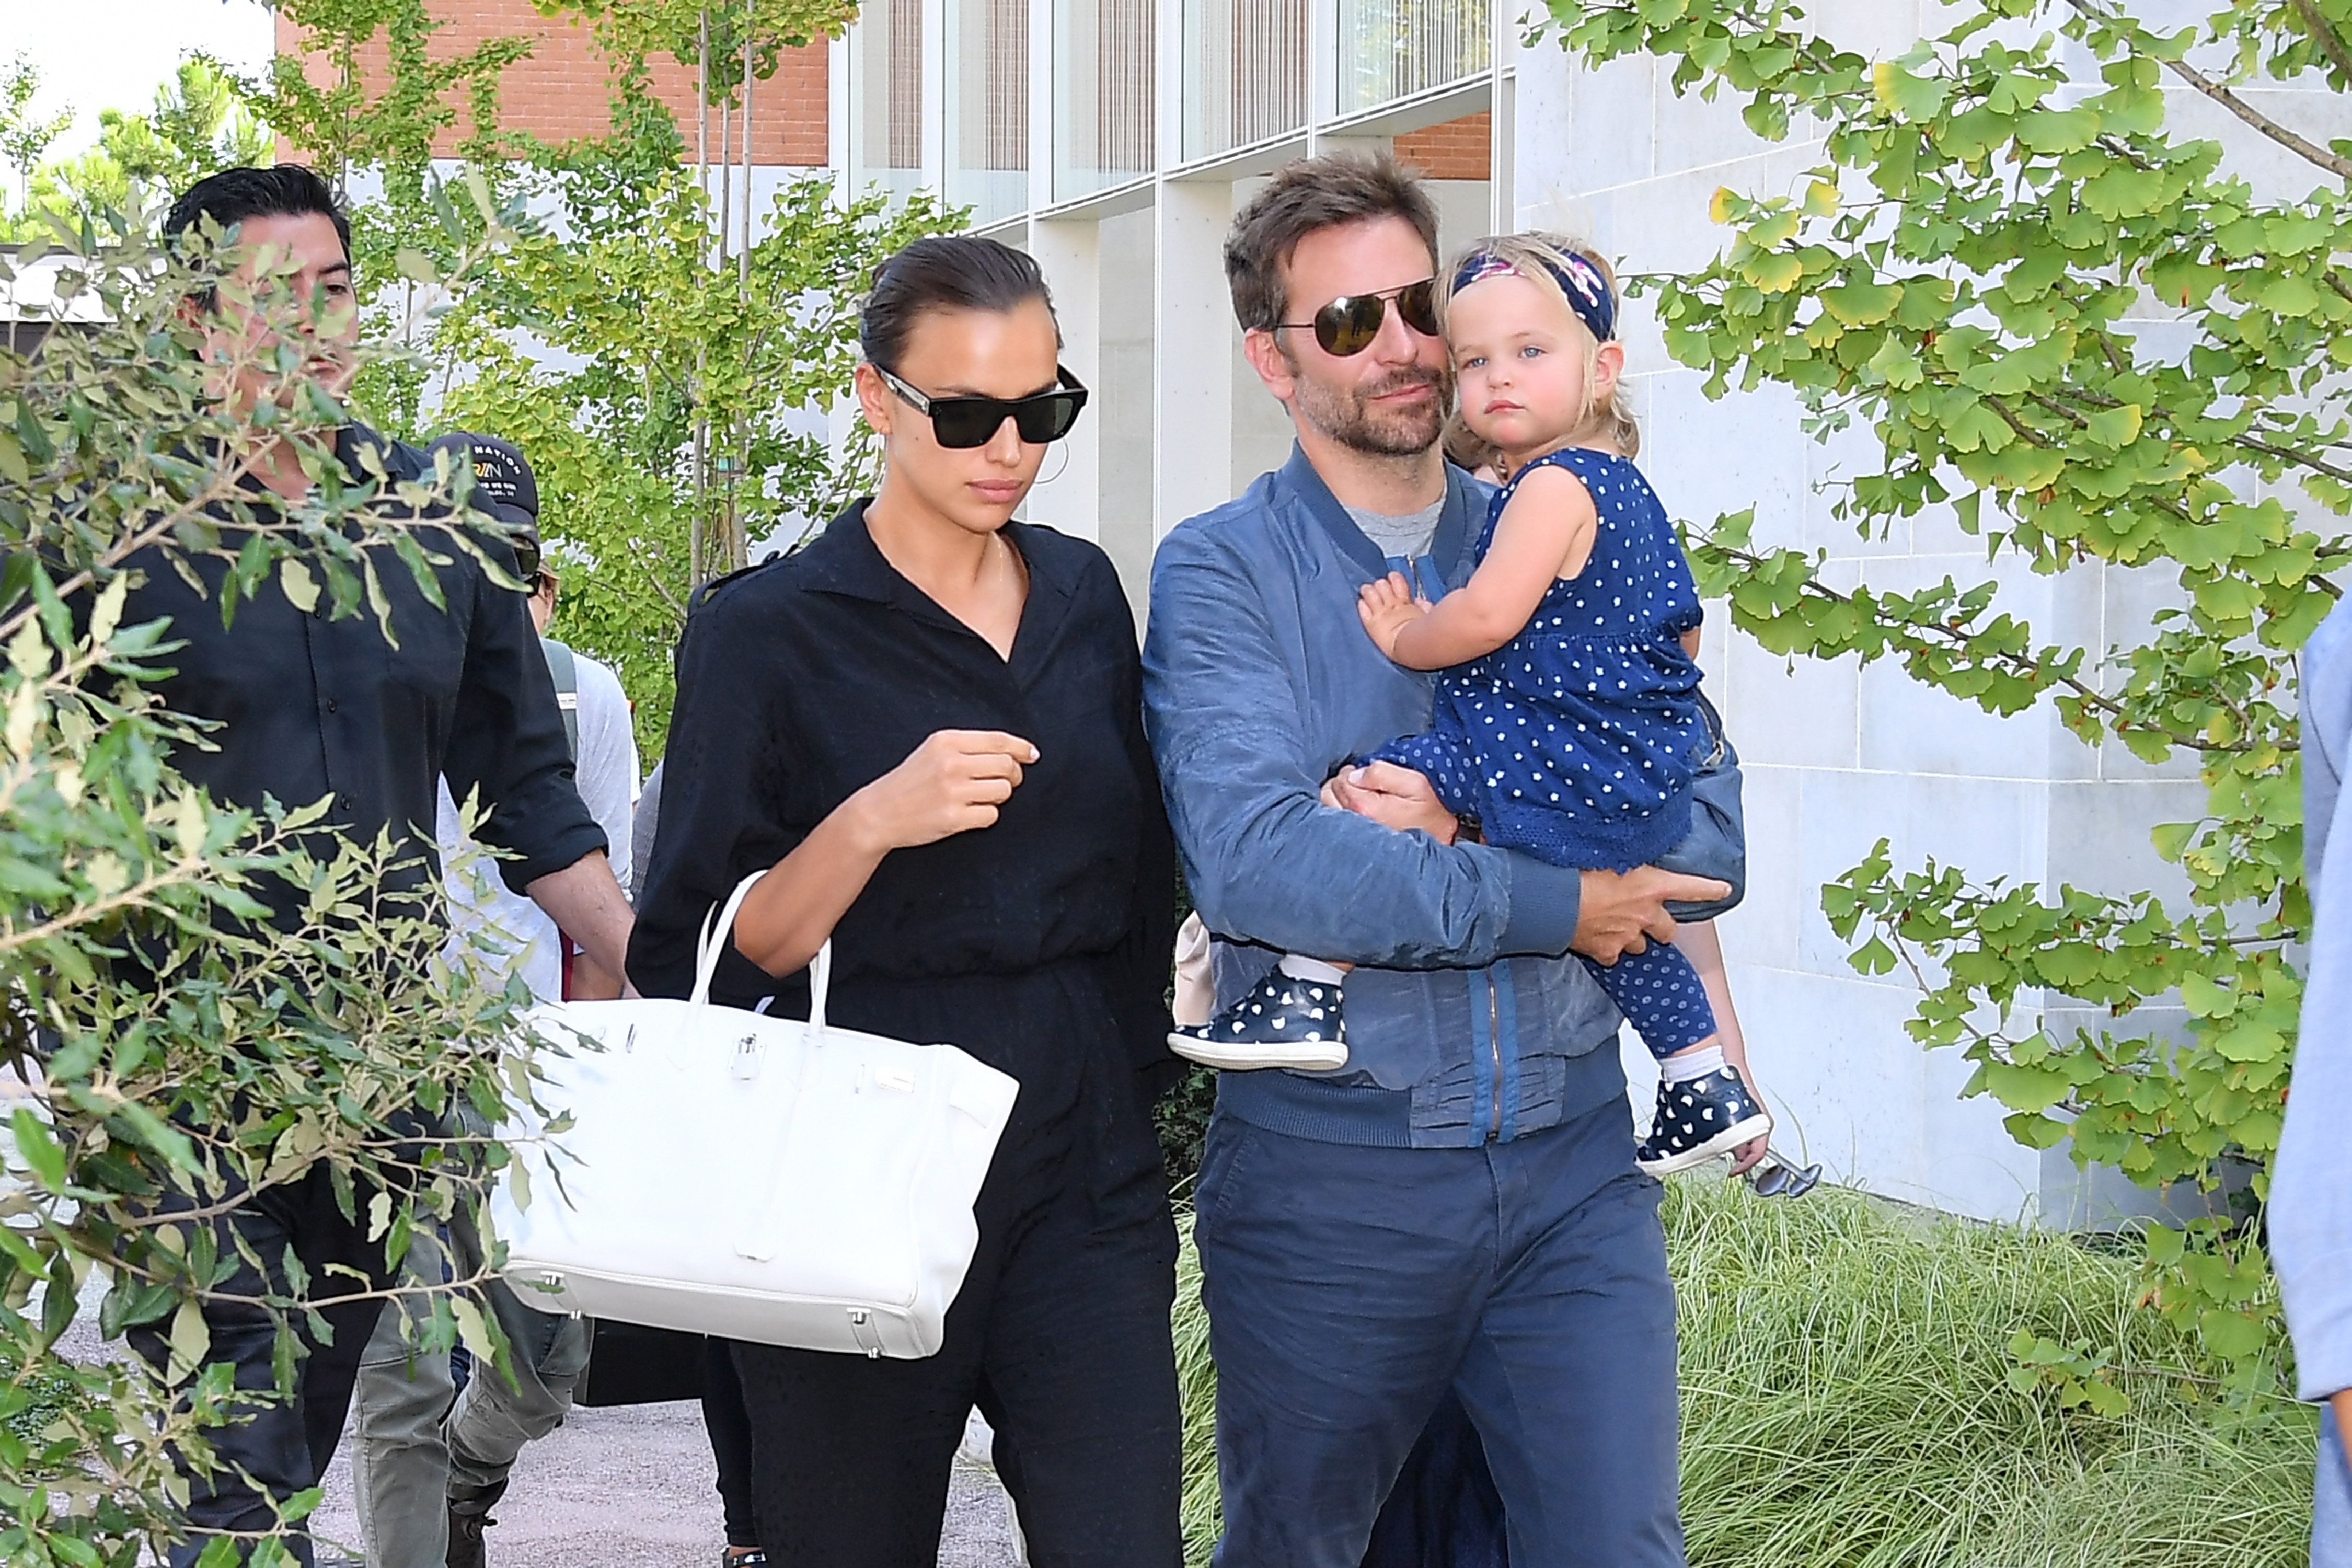 Bradley Cooper, Irina Shayk, and their daughter Lea on August 30, 2018 in Venice, Italy | Source: Getty Images